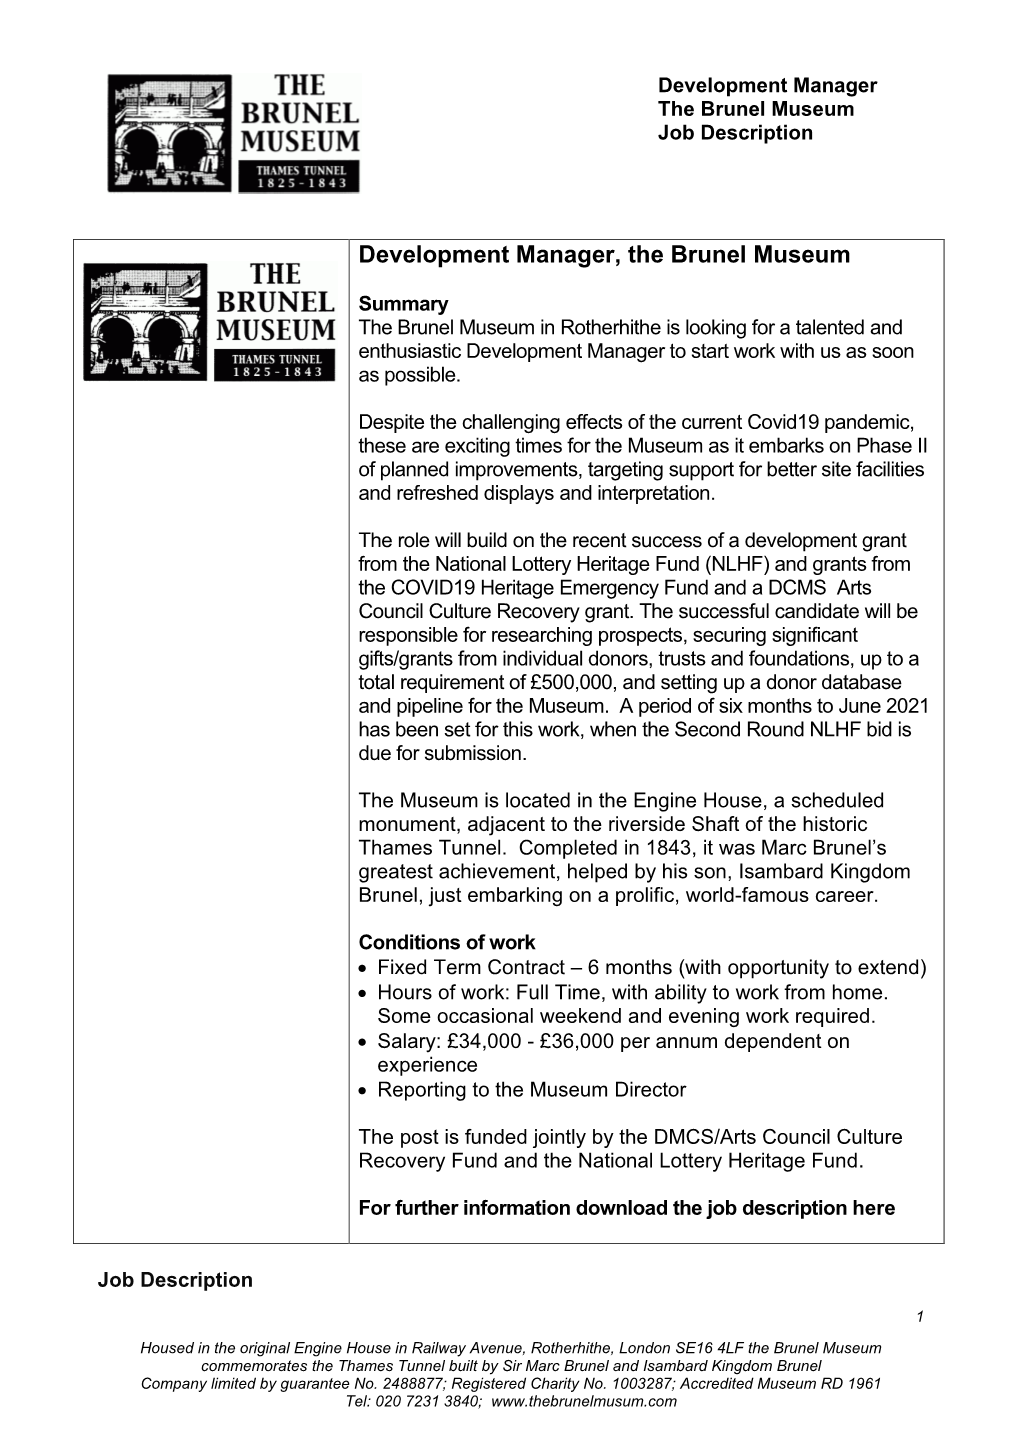 Development Manager, the Brunel Museum